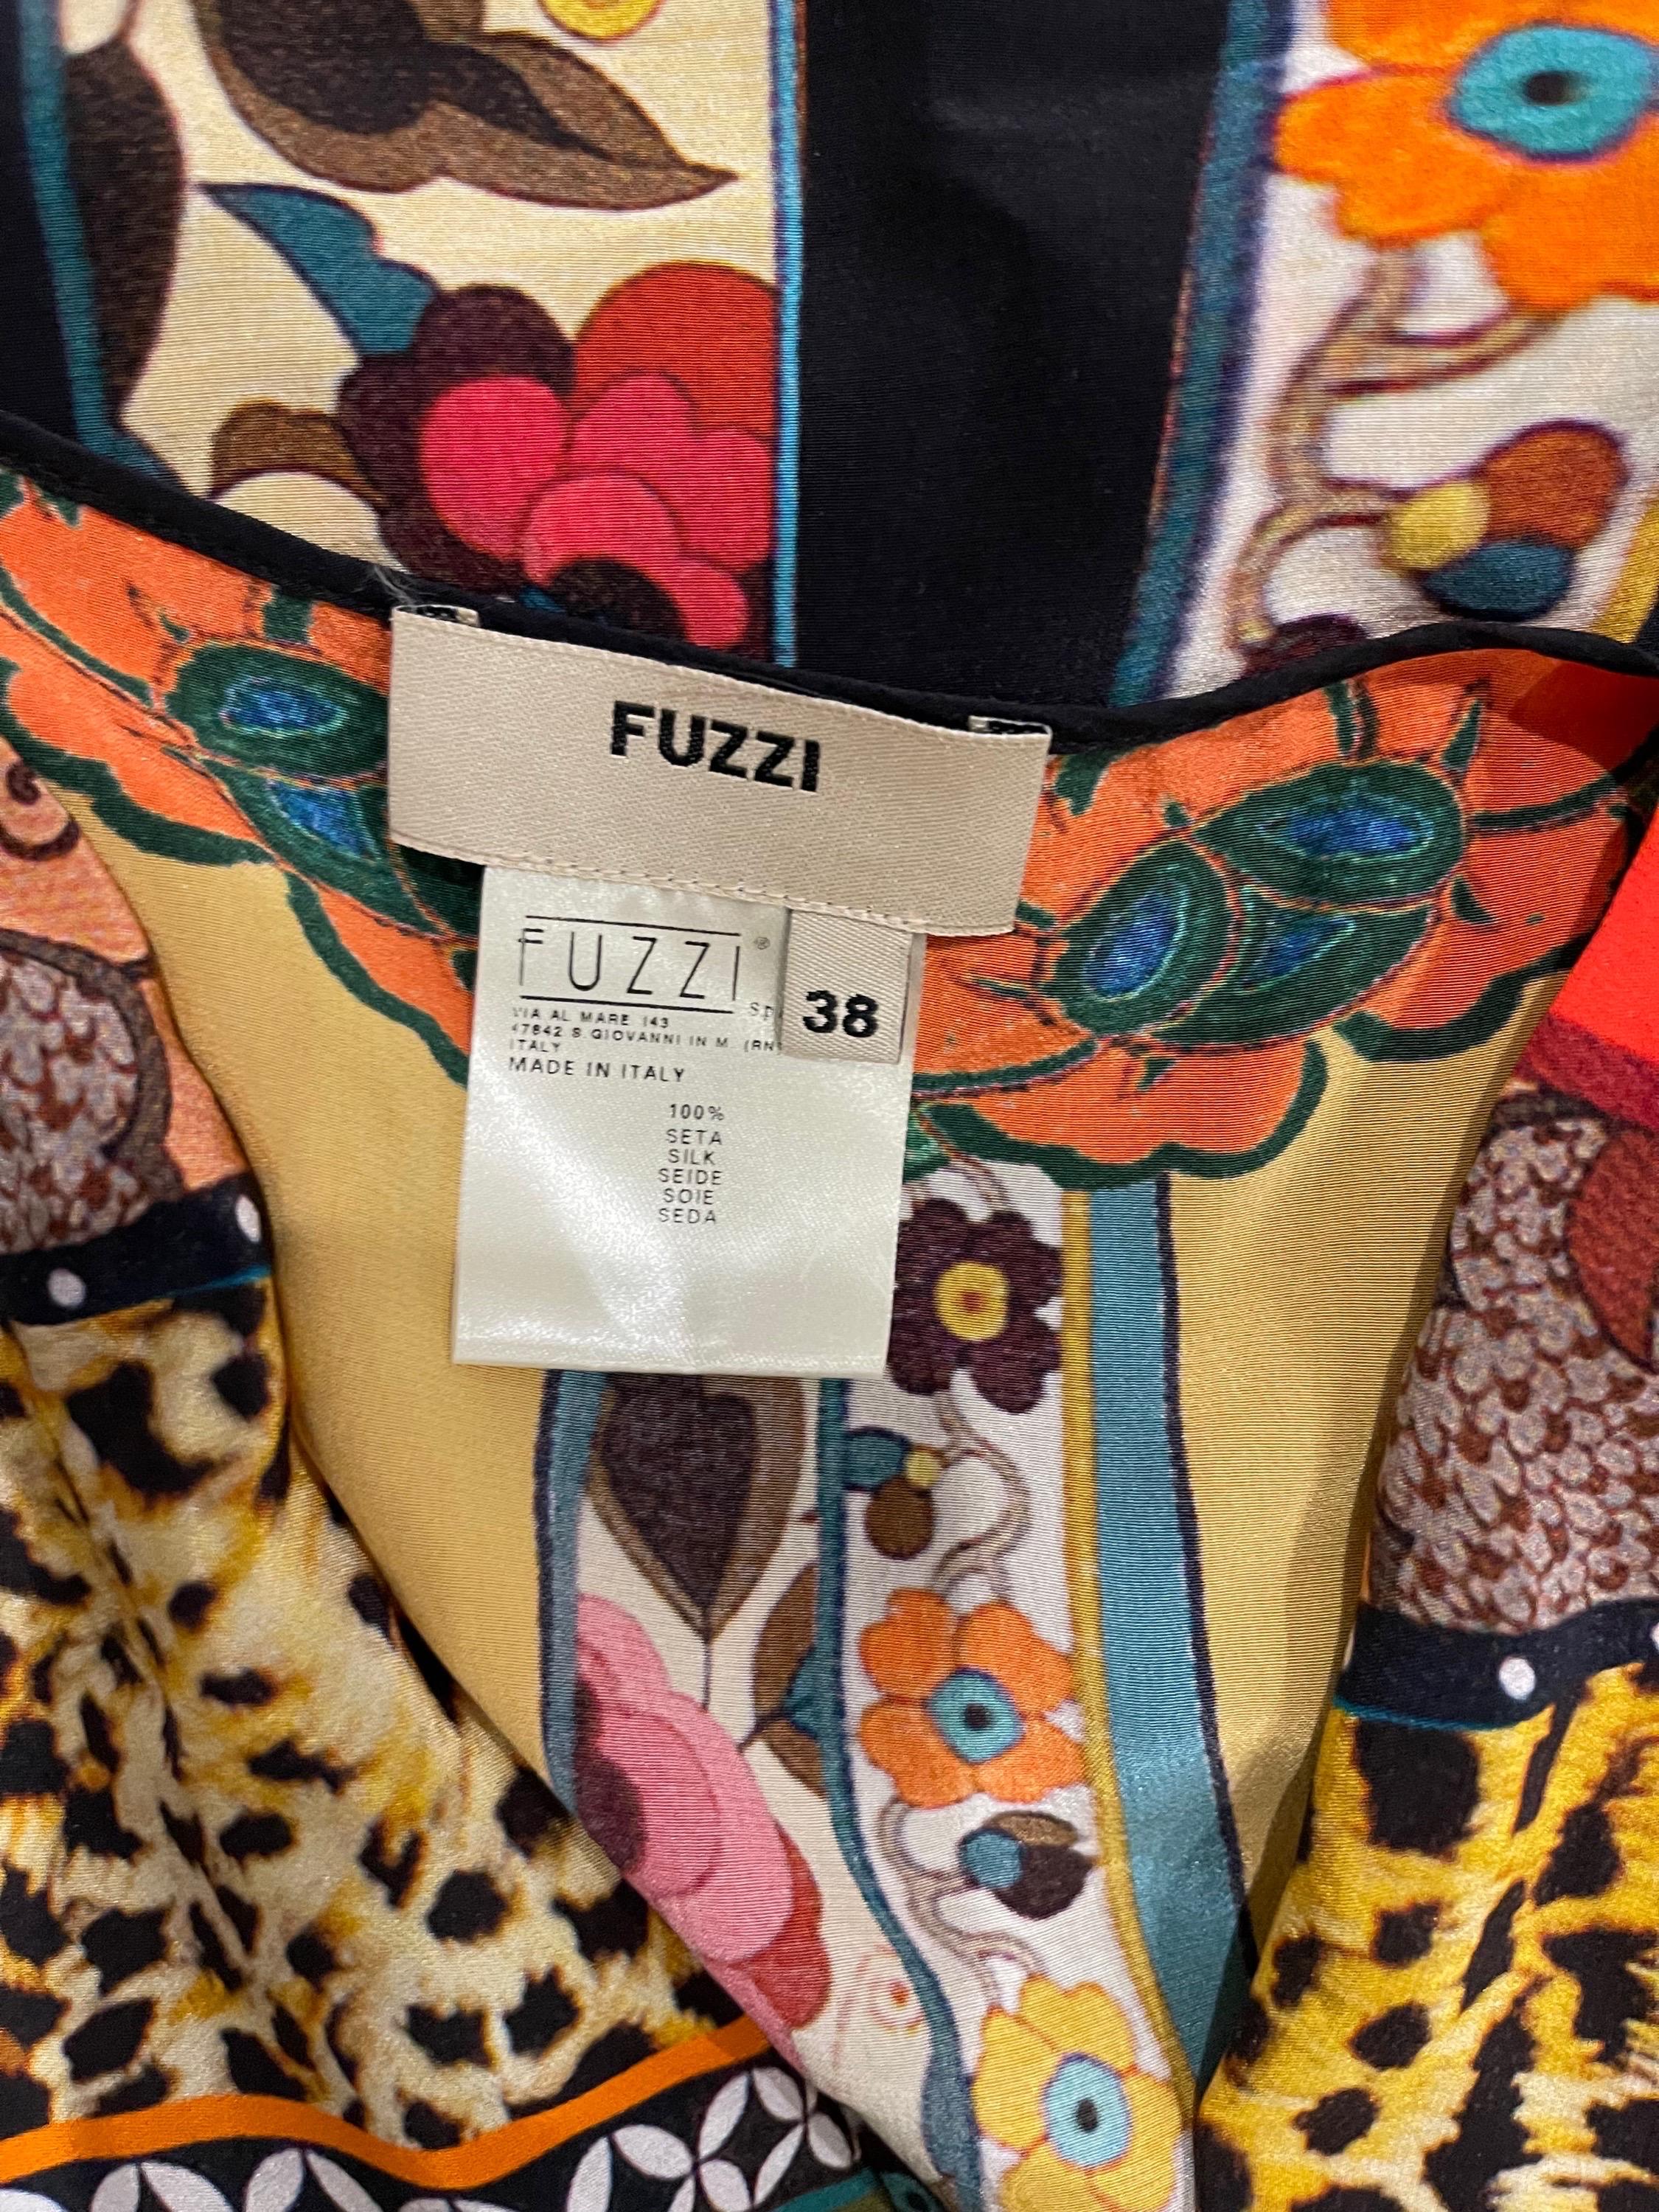 Amazing 1990s FUZZI mixed media silk top ! Features vibrant colors of orange, yellow, green, purple, red and pink throughout. Prints of belts, leopard / cheetah, and flowers throughout. Cowl neck style. Simply slips over the head. Can be dressed up